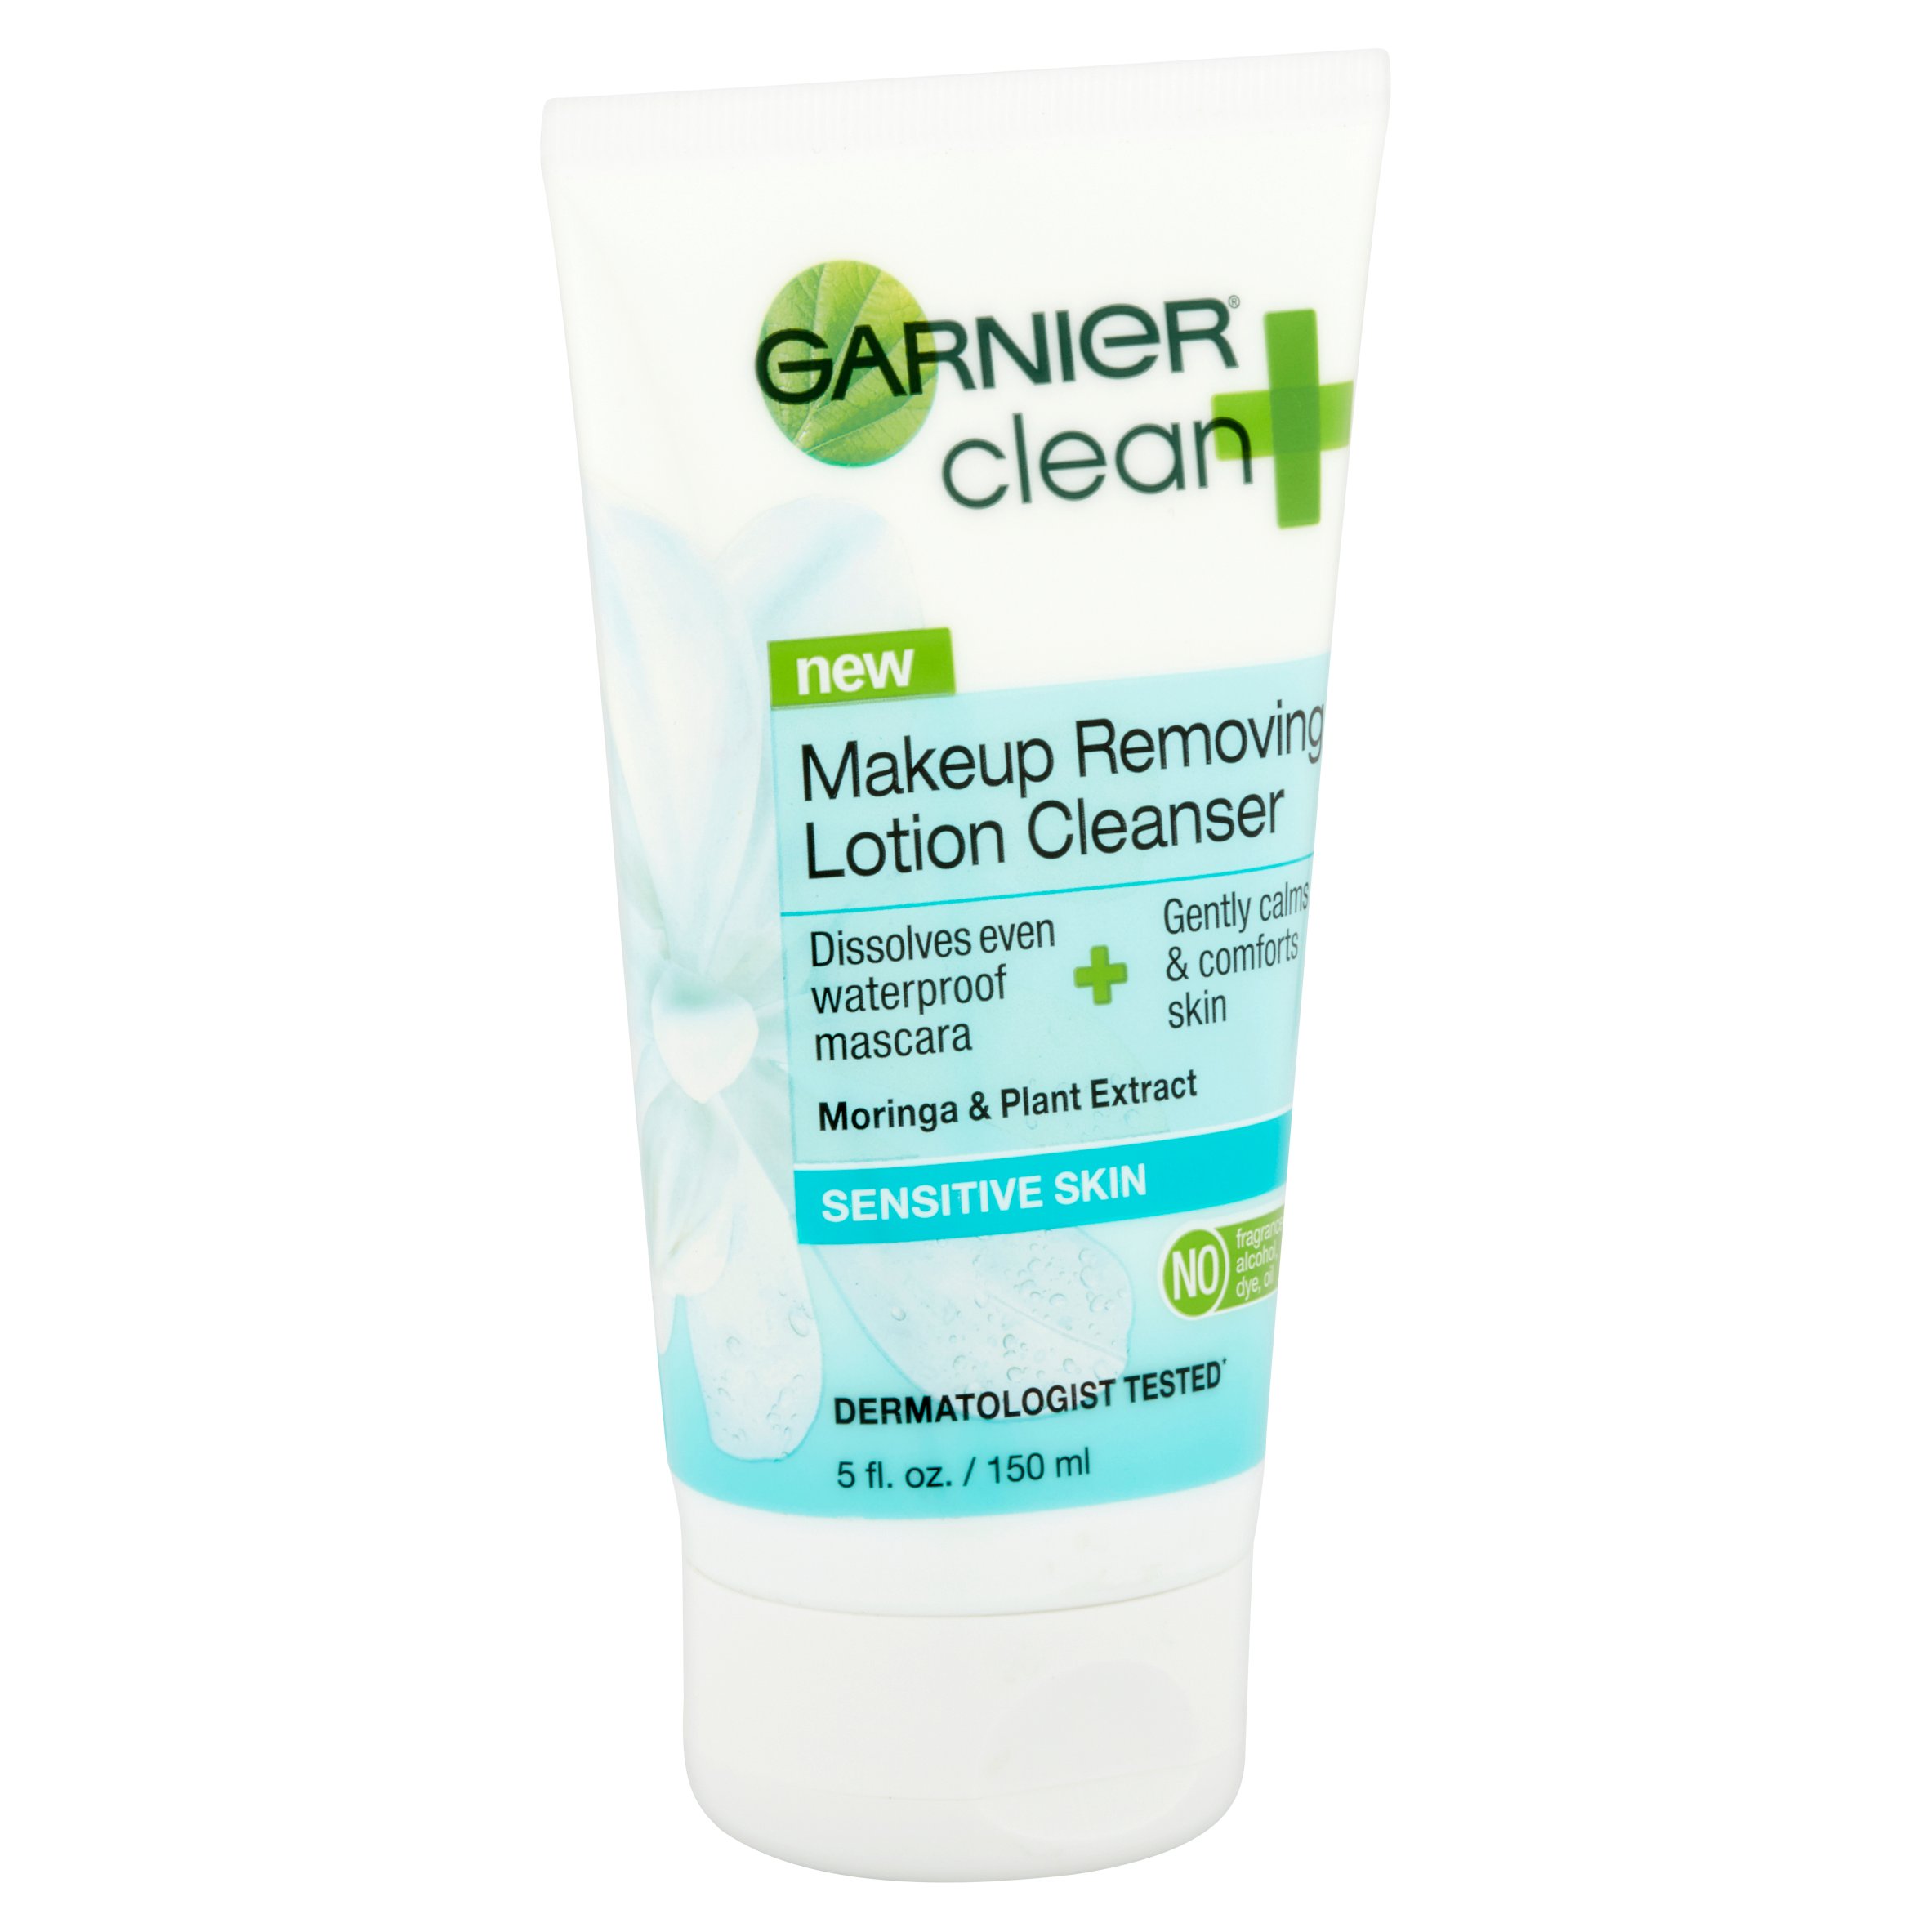 Garnier Clean+ Makeup Removing Lotion Cleanser Sensitive Skin, 5 Fluid Ounces (Packaging May Vary) - image 2 of 2